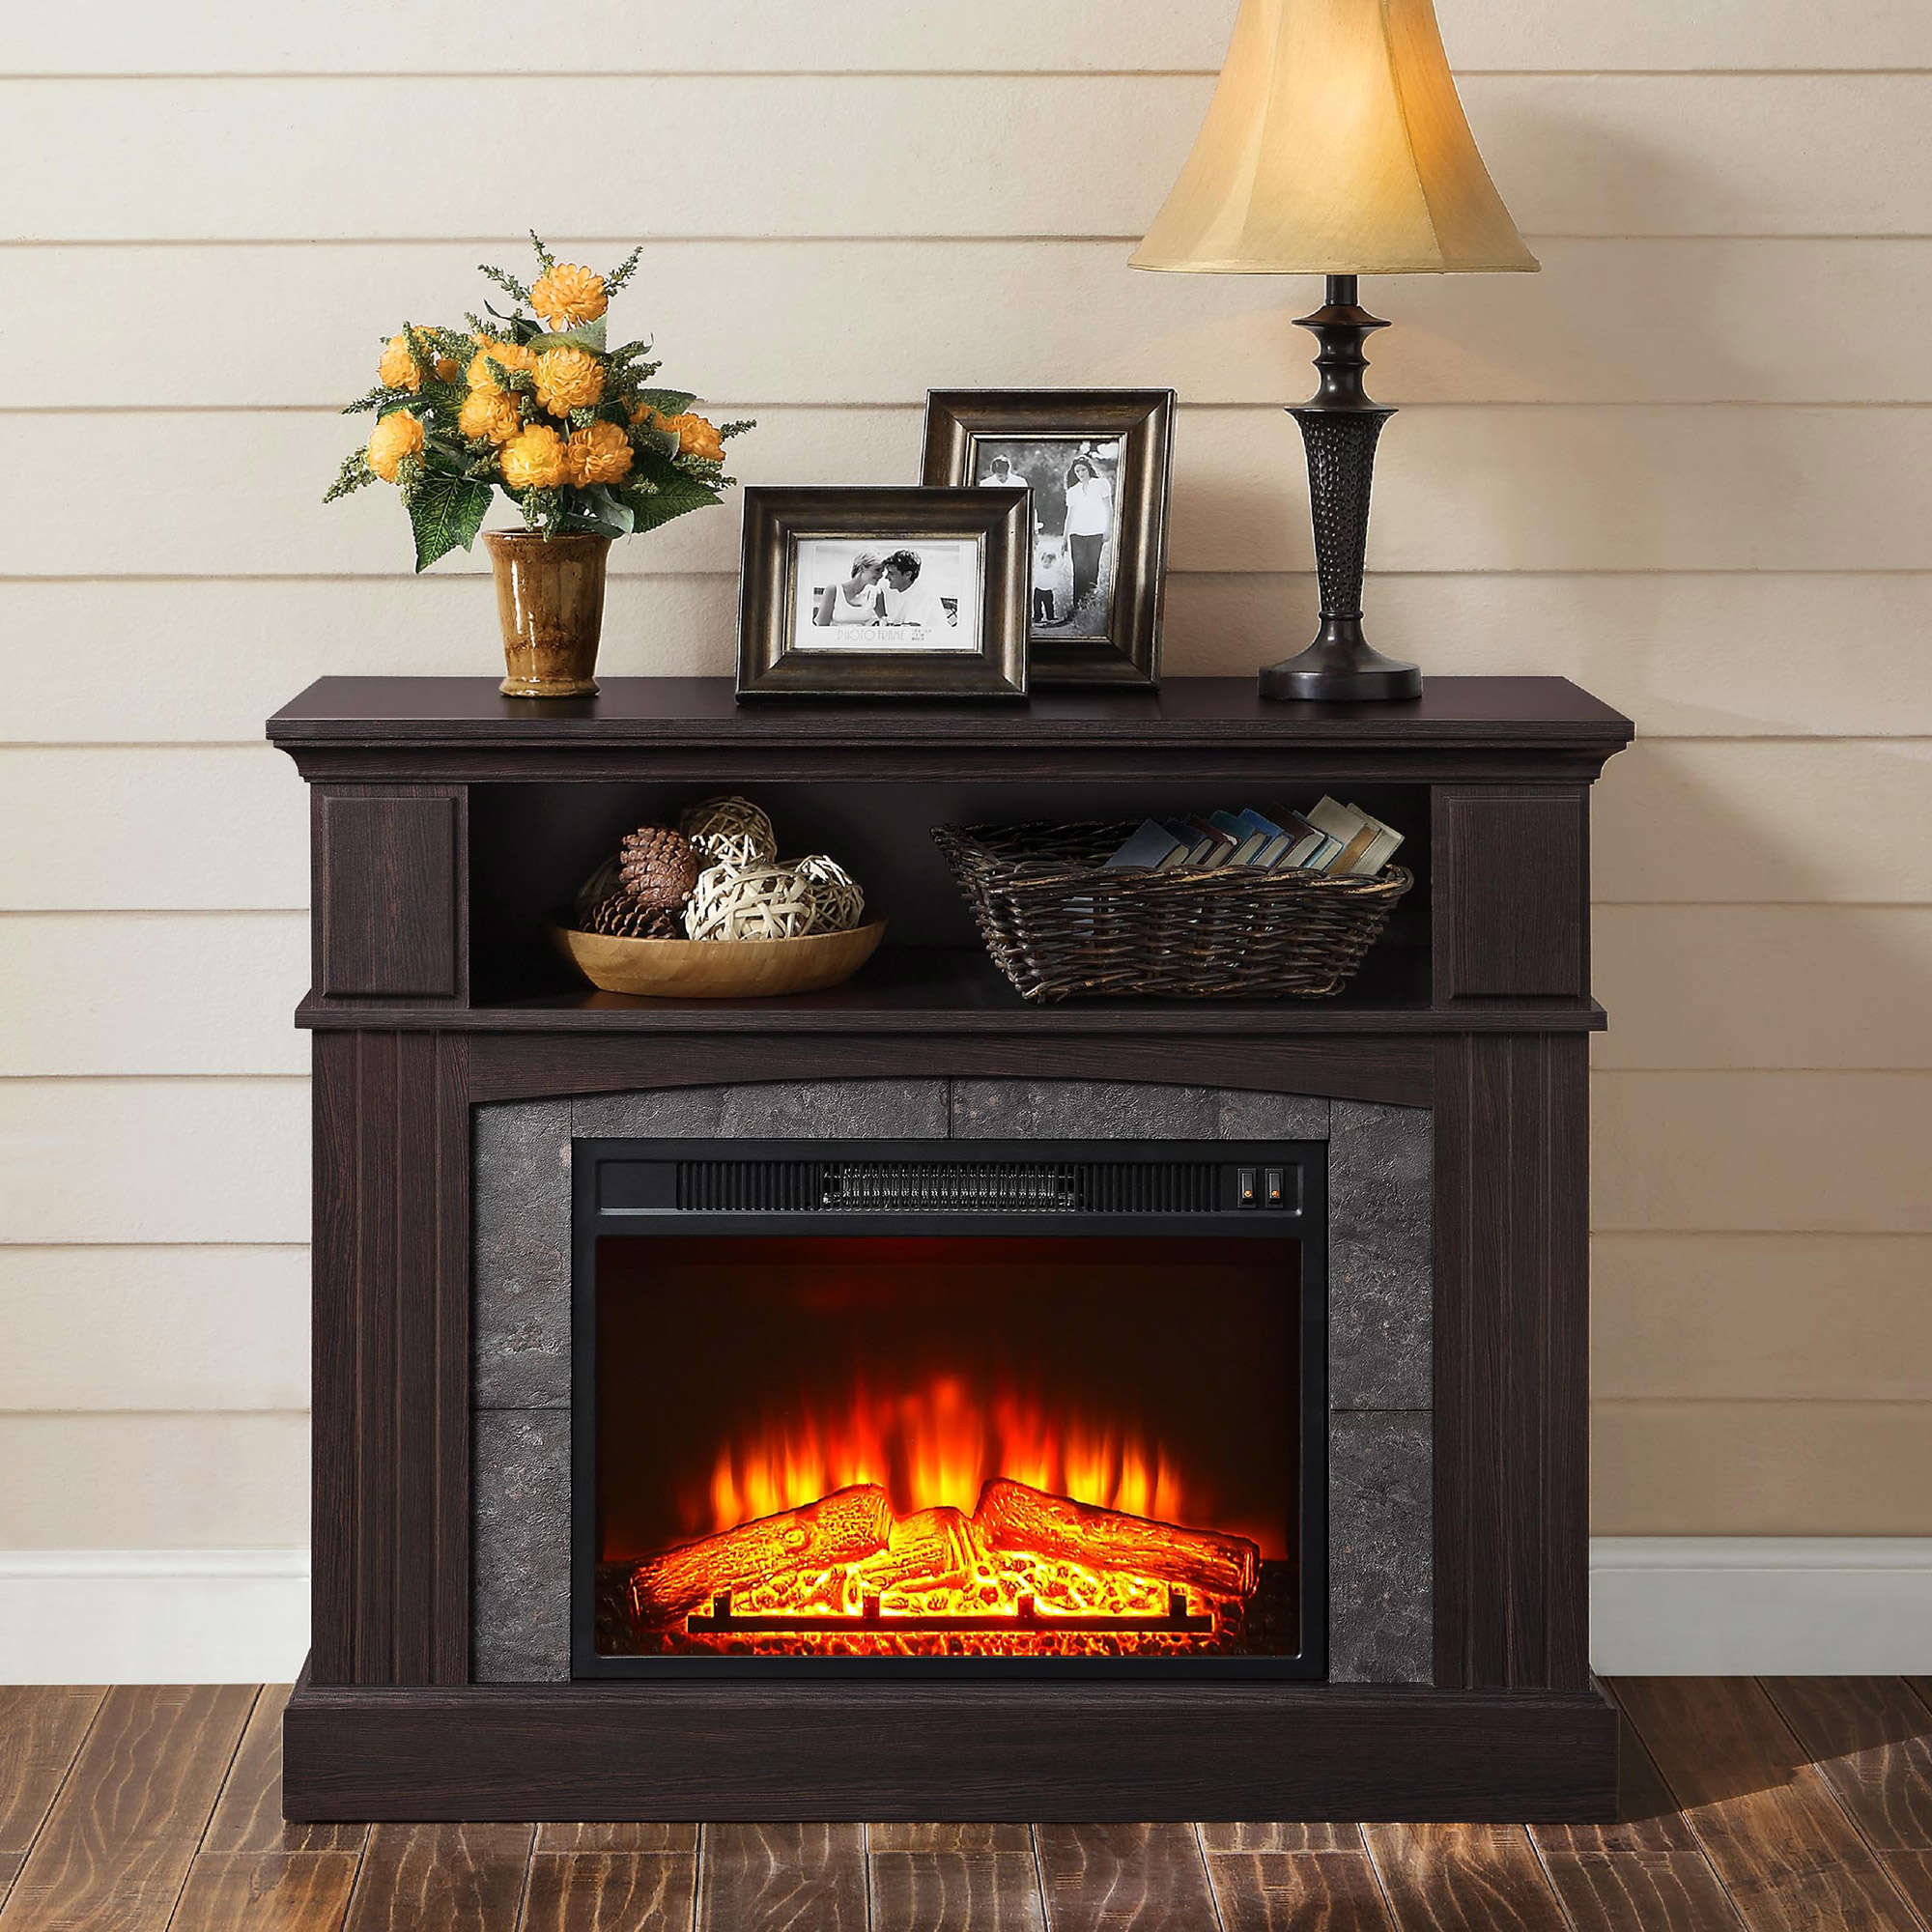 Whalen Media Fireplace for Your Home Television Stand fits TVs up to 50" Espresso Finish - image 4 of 5